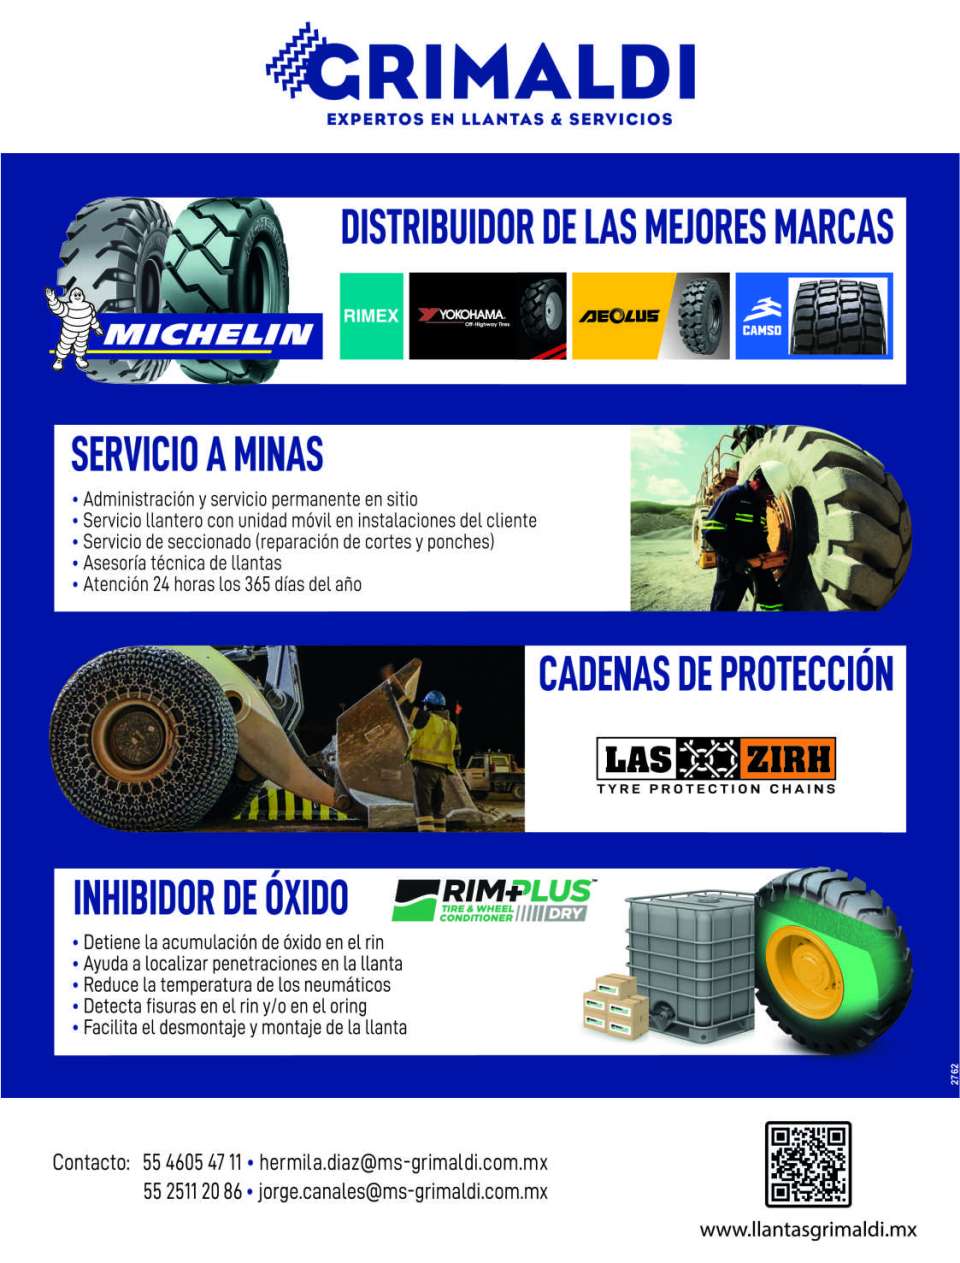 Distributor of the best Tires, Mine Services, Protection Chains, Rim Plus Dry Tire Additive, Rust Inhibitor. Distributor of the best brands Michellin, Yokohama, Aeolus.